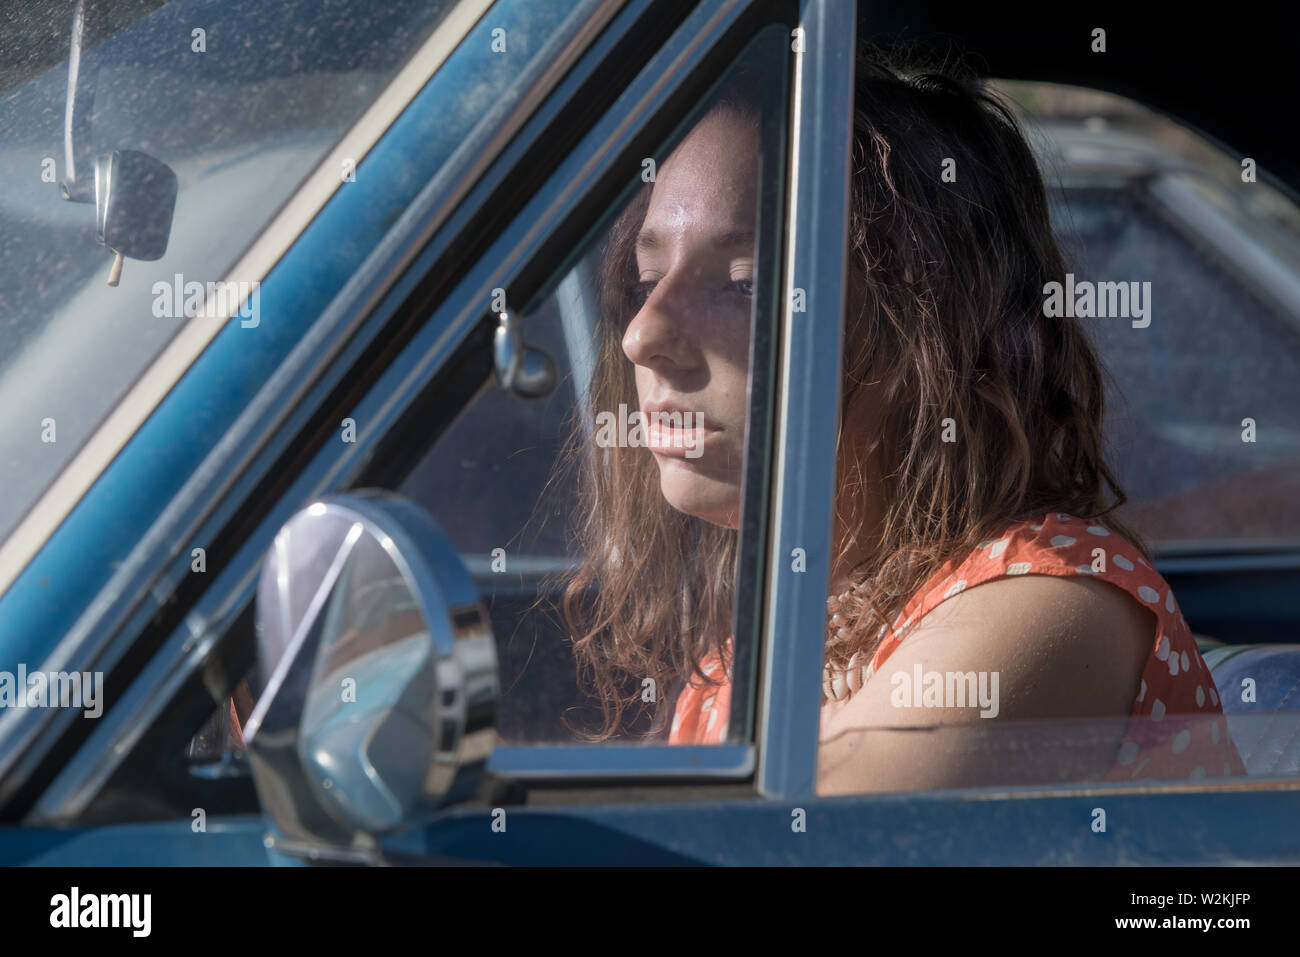 an attrrative young woman sitting in a car Stock Photo